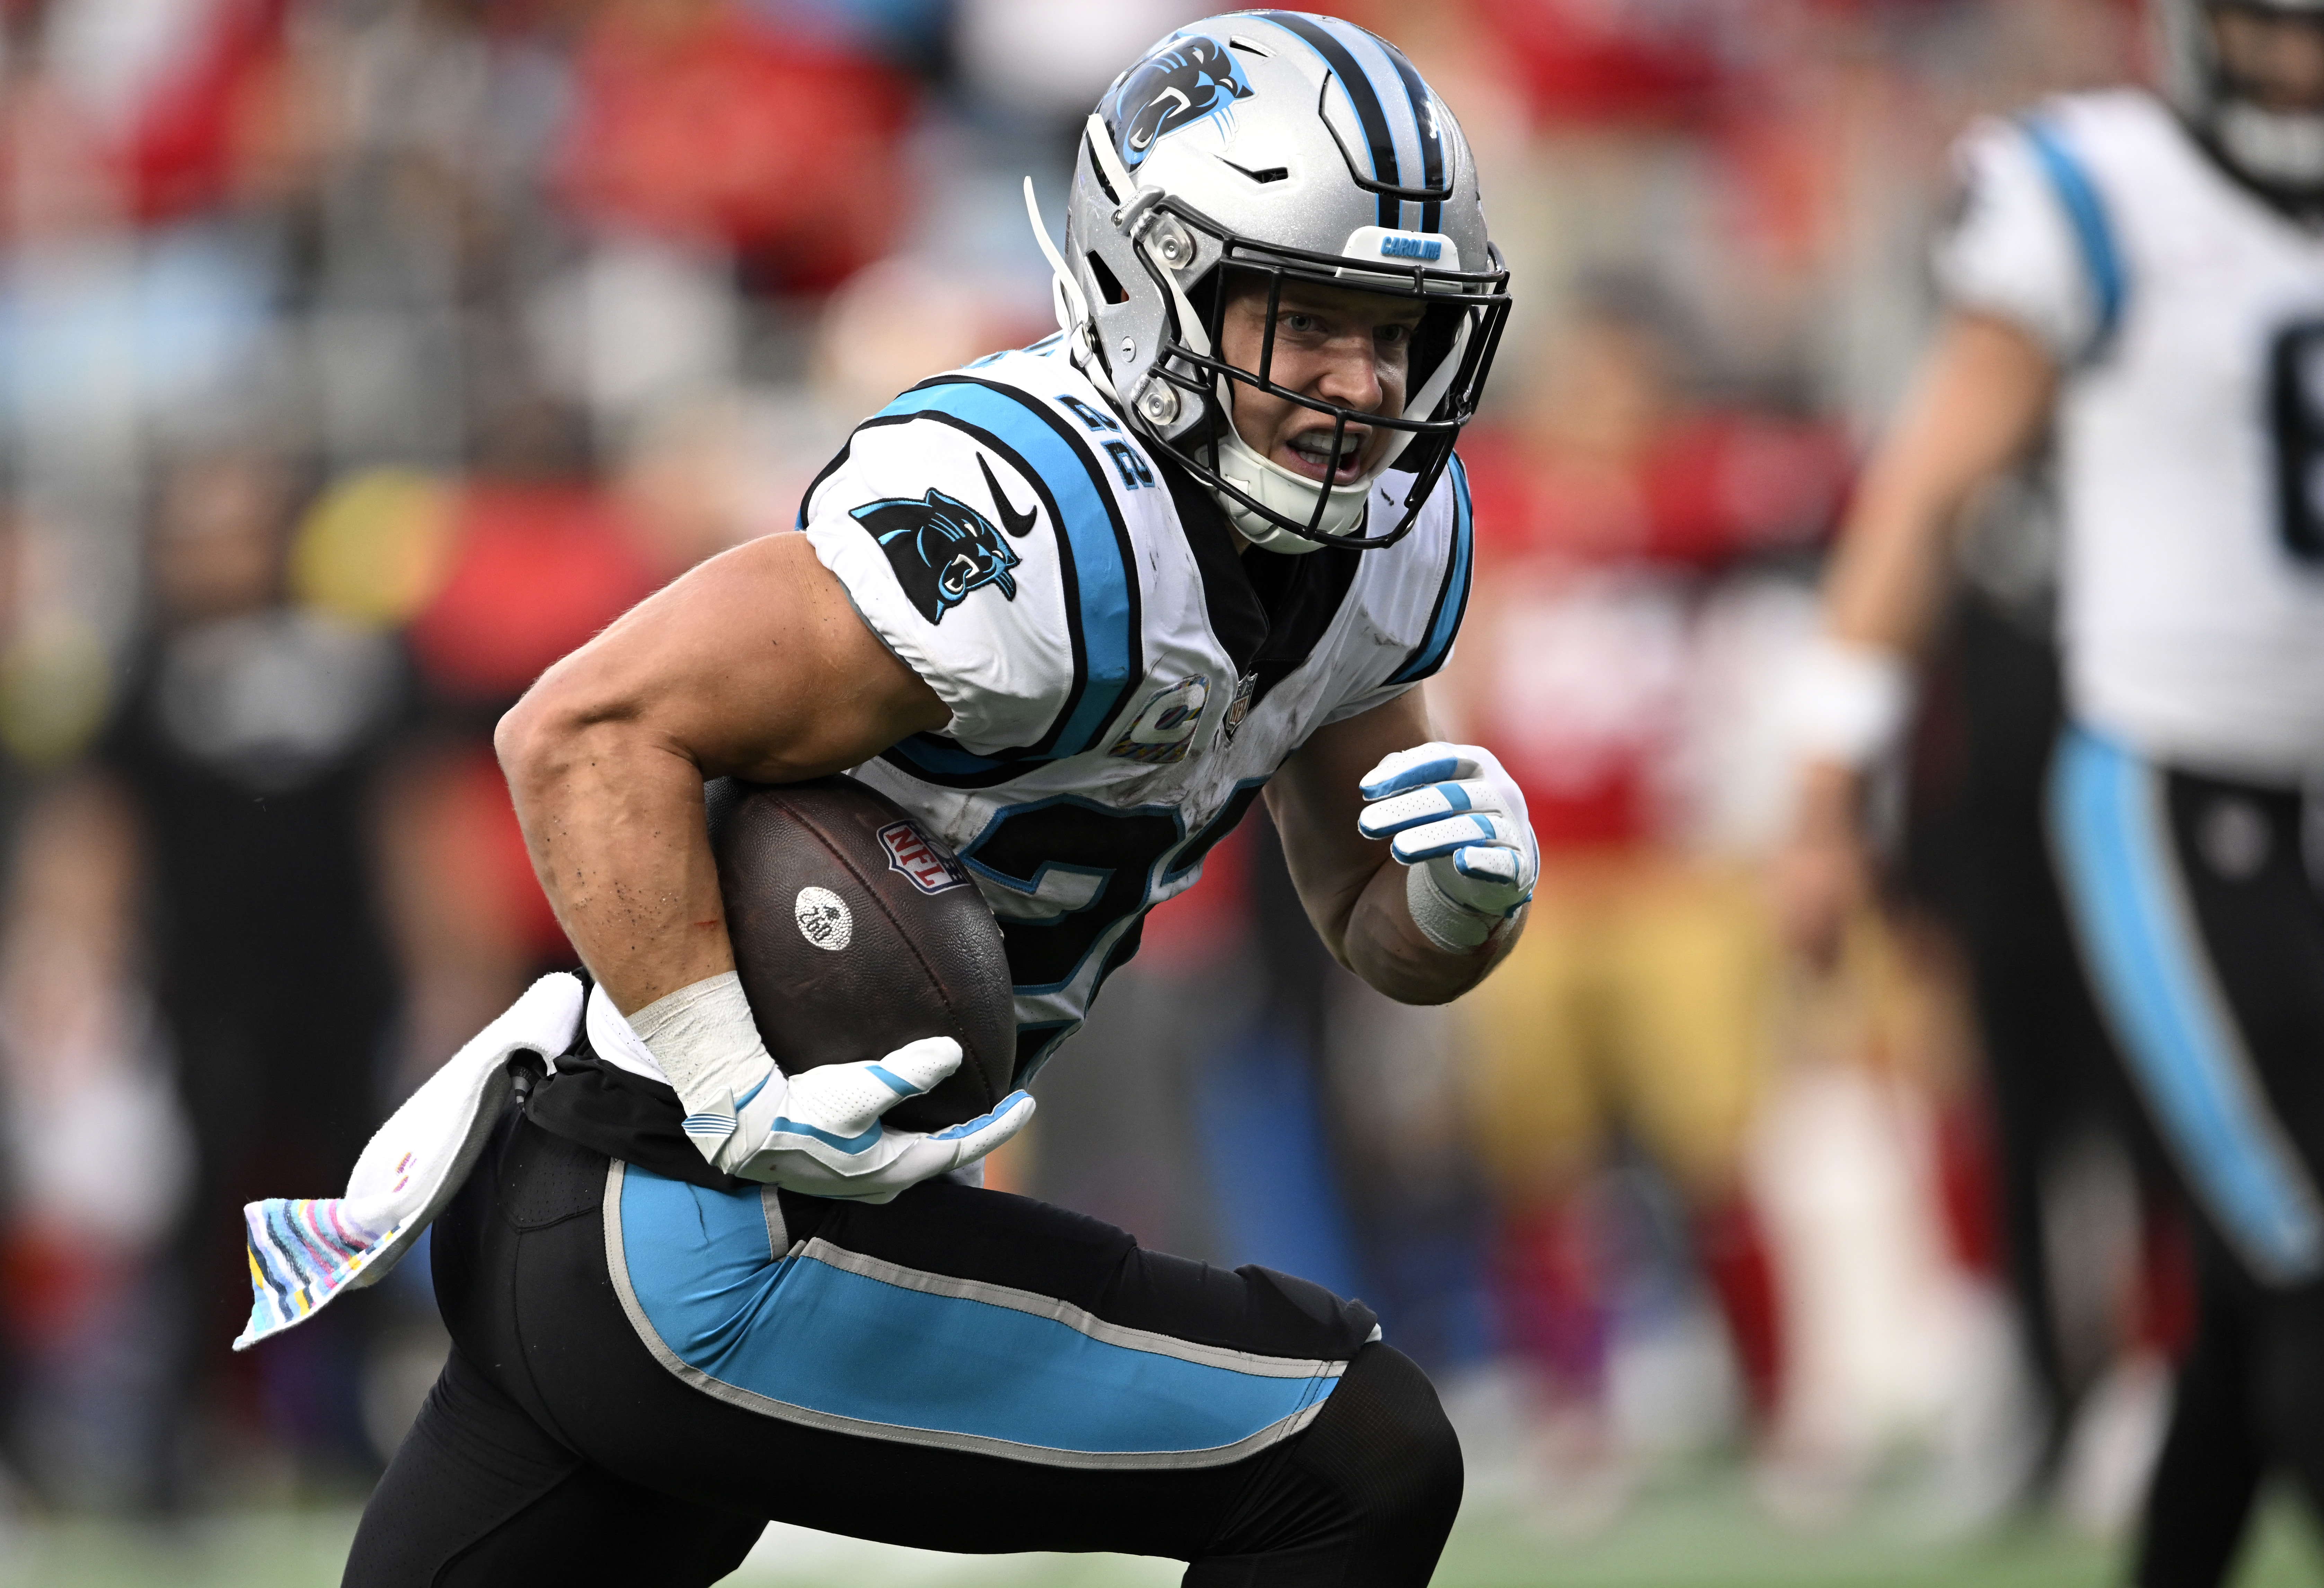 Running back Christian McCaffrey of the Carolina Panthers rushes with the ball in the game against the San Francisco 49ers at Bank of America Stadium in Charlotte, North Carolina, October 9, 2022. /CFP 